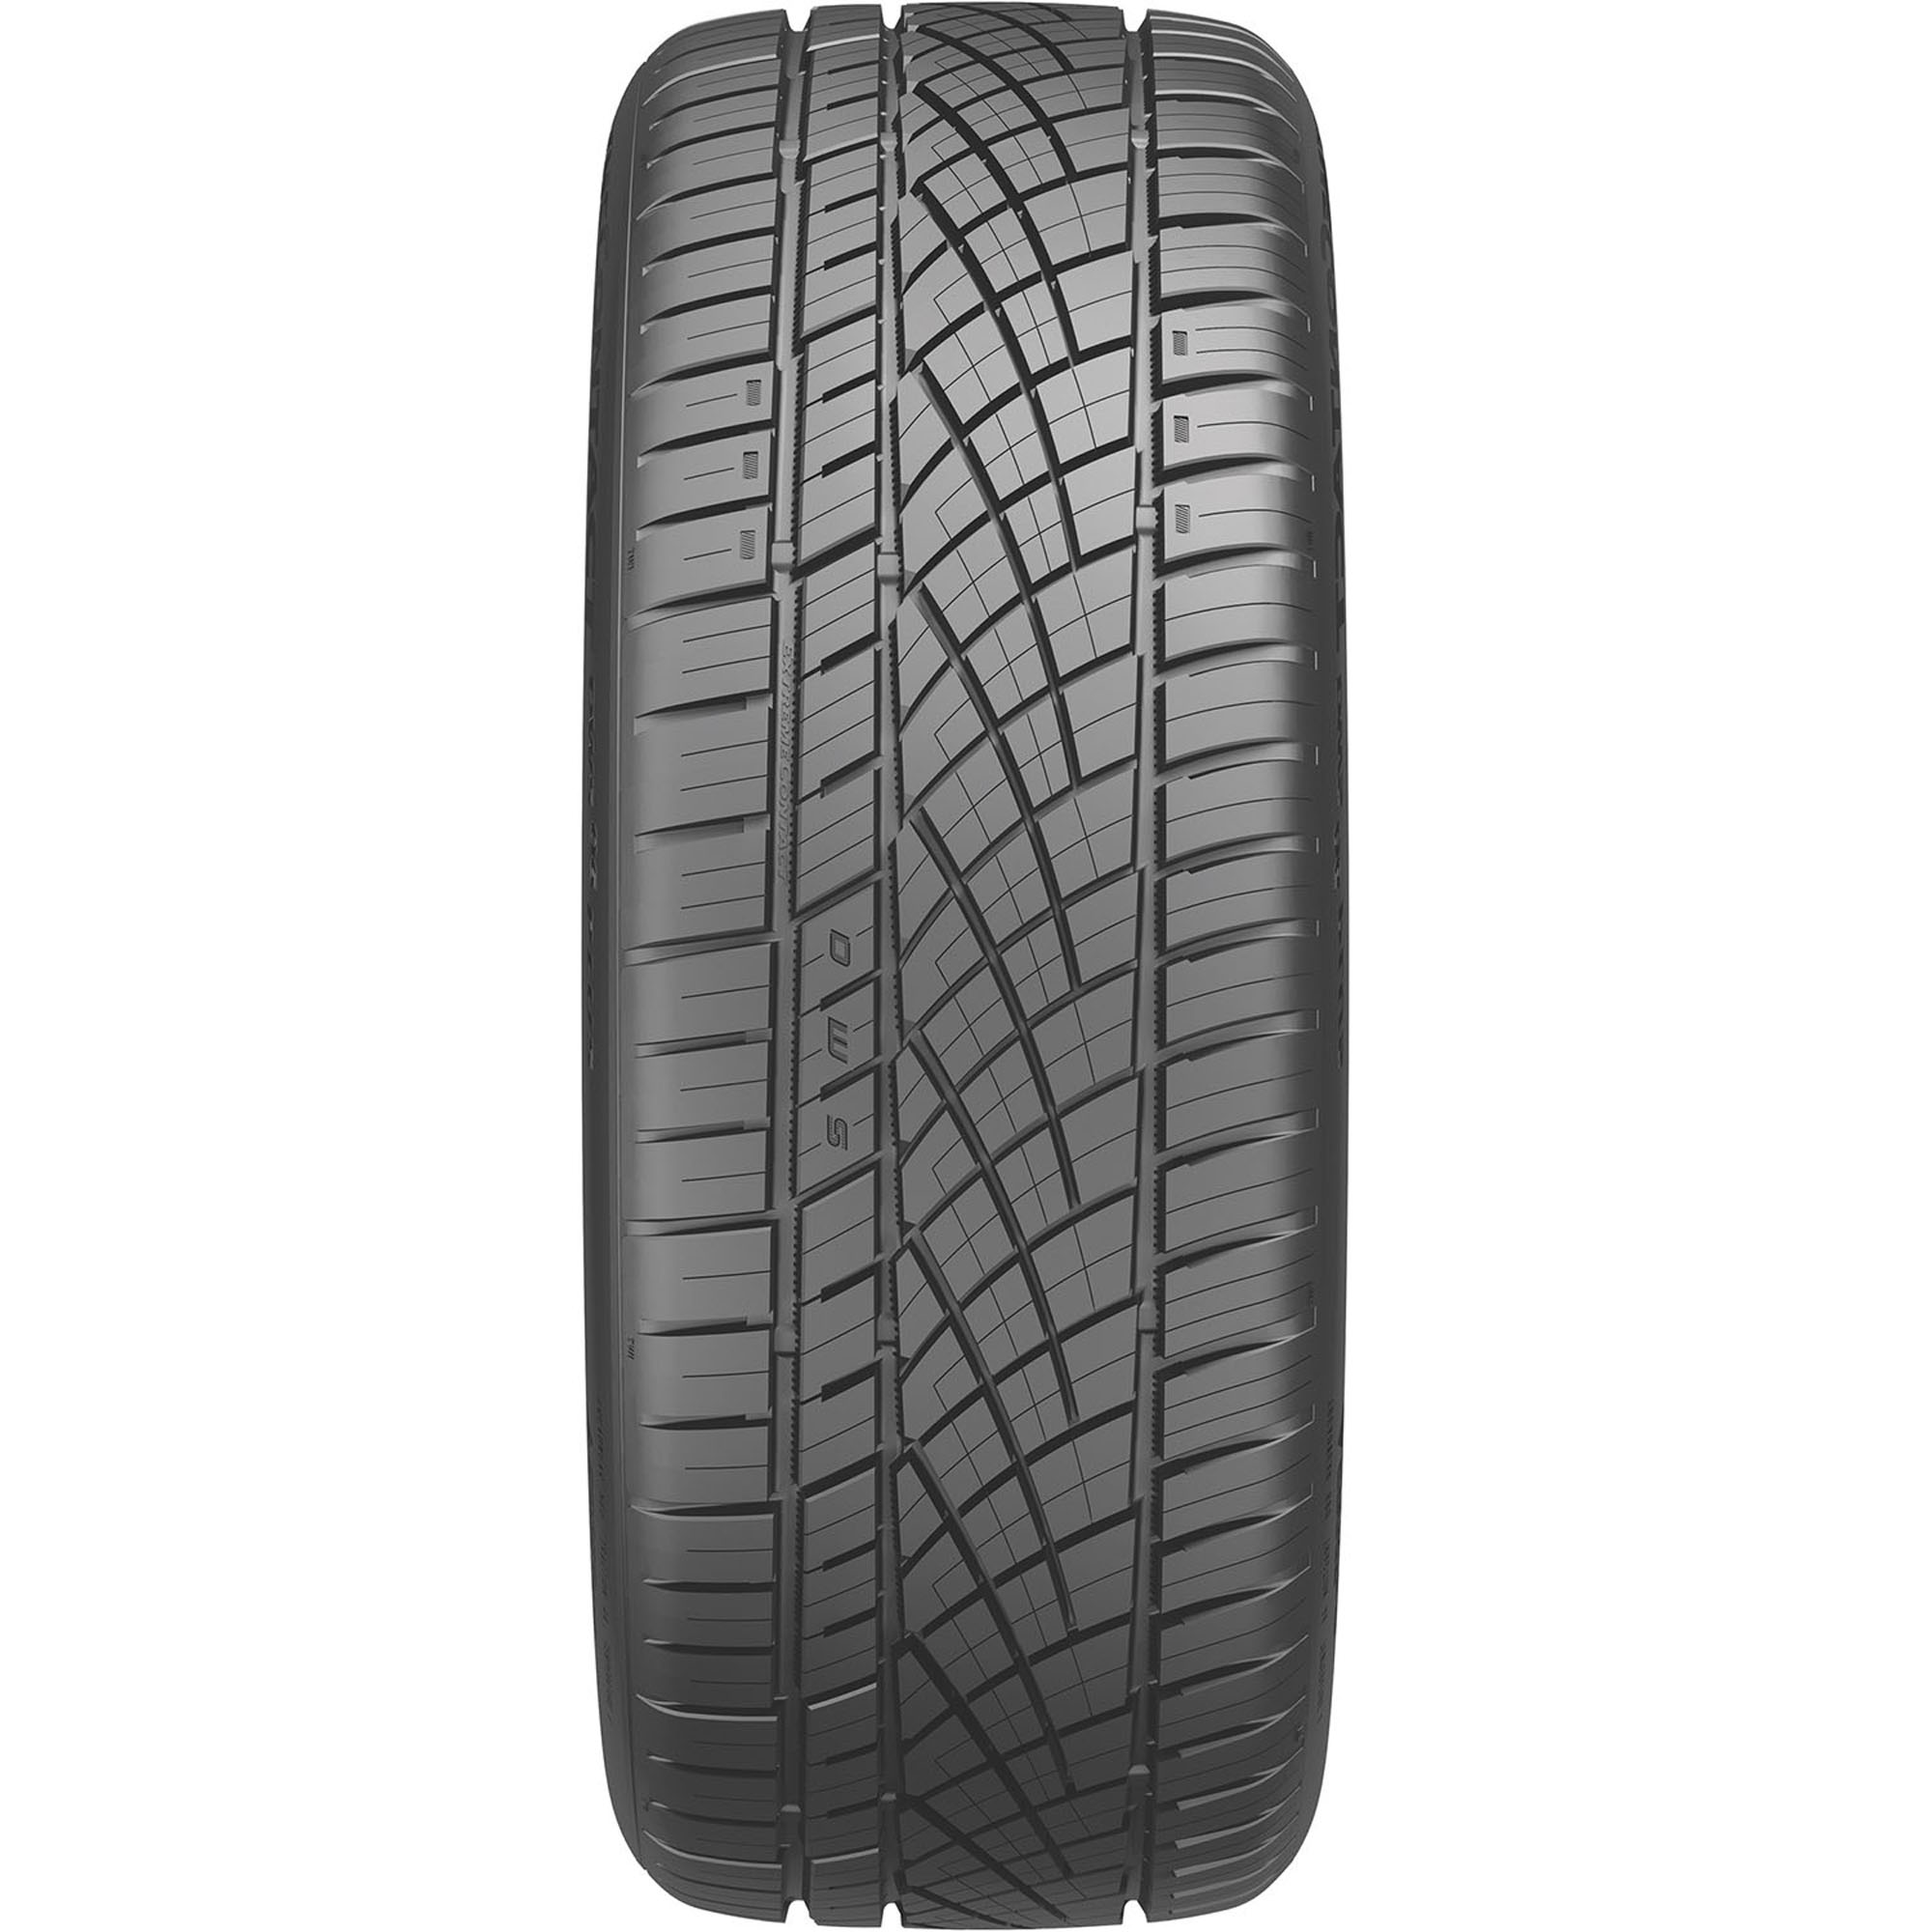 Continental ExtremeContact DWS06 PLUS All Season 255/45ZR18 103Y XL  Passenger Tire Fits: 2005-13 Toyota Tacoma X-Runner, 2007-10 Ford Mustang  Shelby GT500